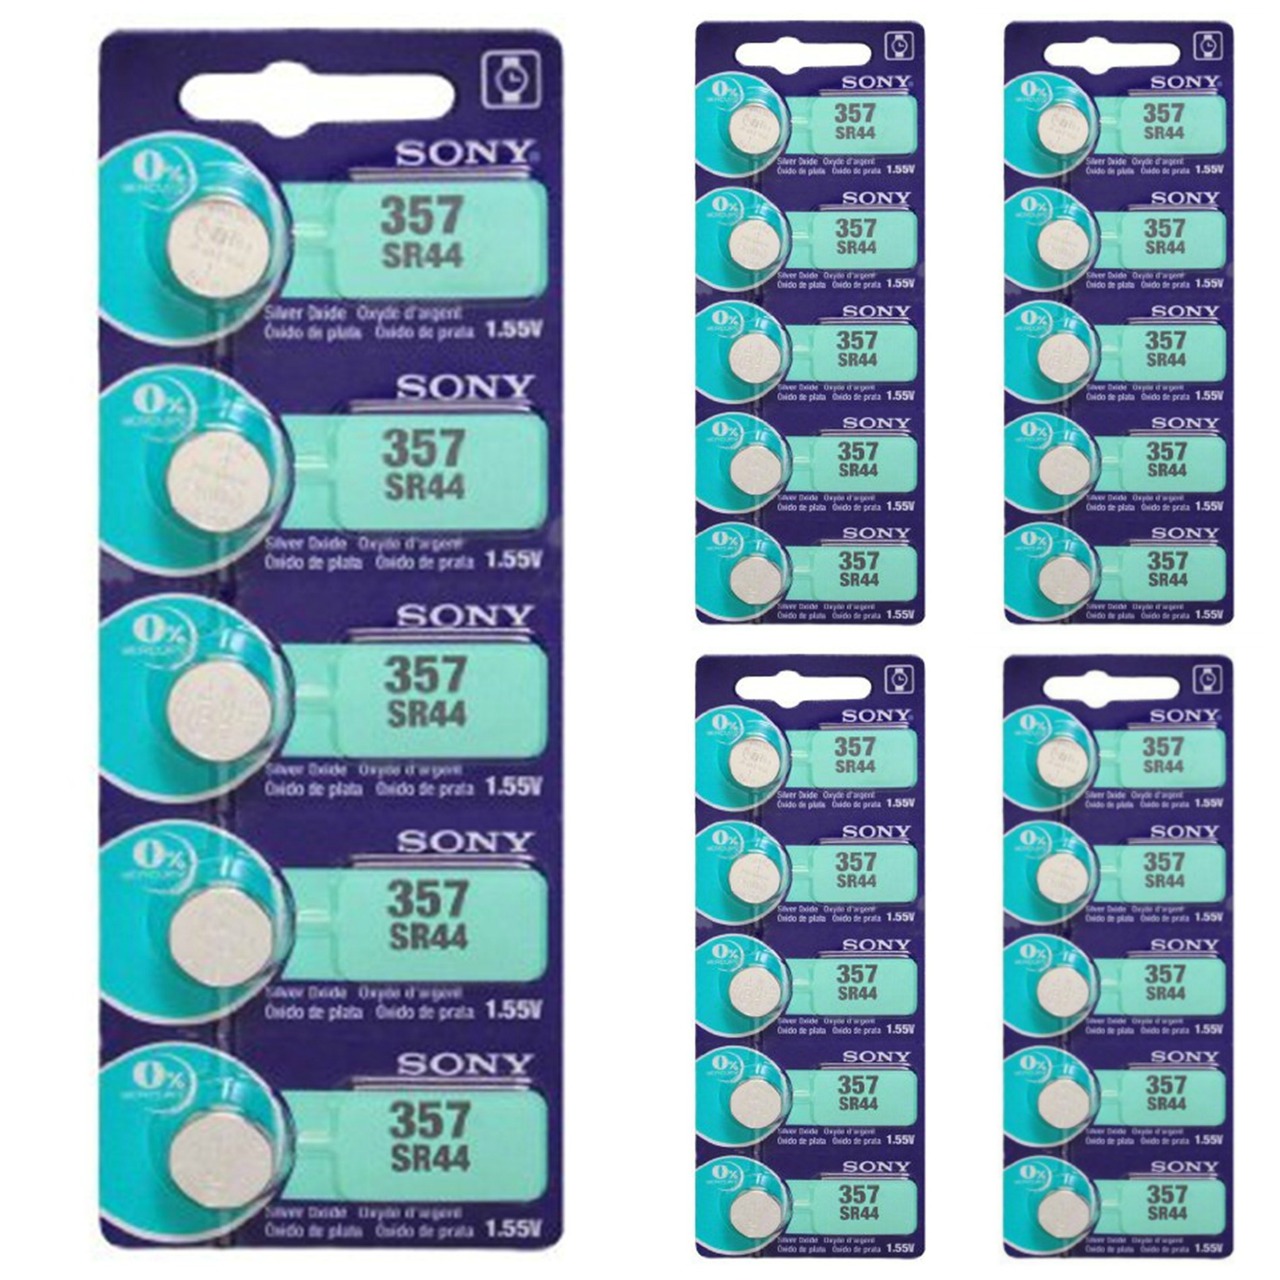 Sony 357/303 - SR44 Silver Oxide Button Battery 1.55V - 50 Pack + FREE SHIPPING!